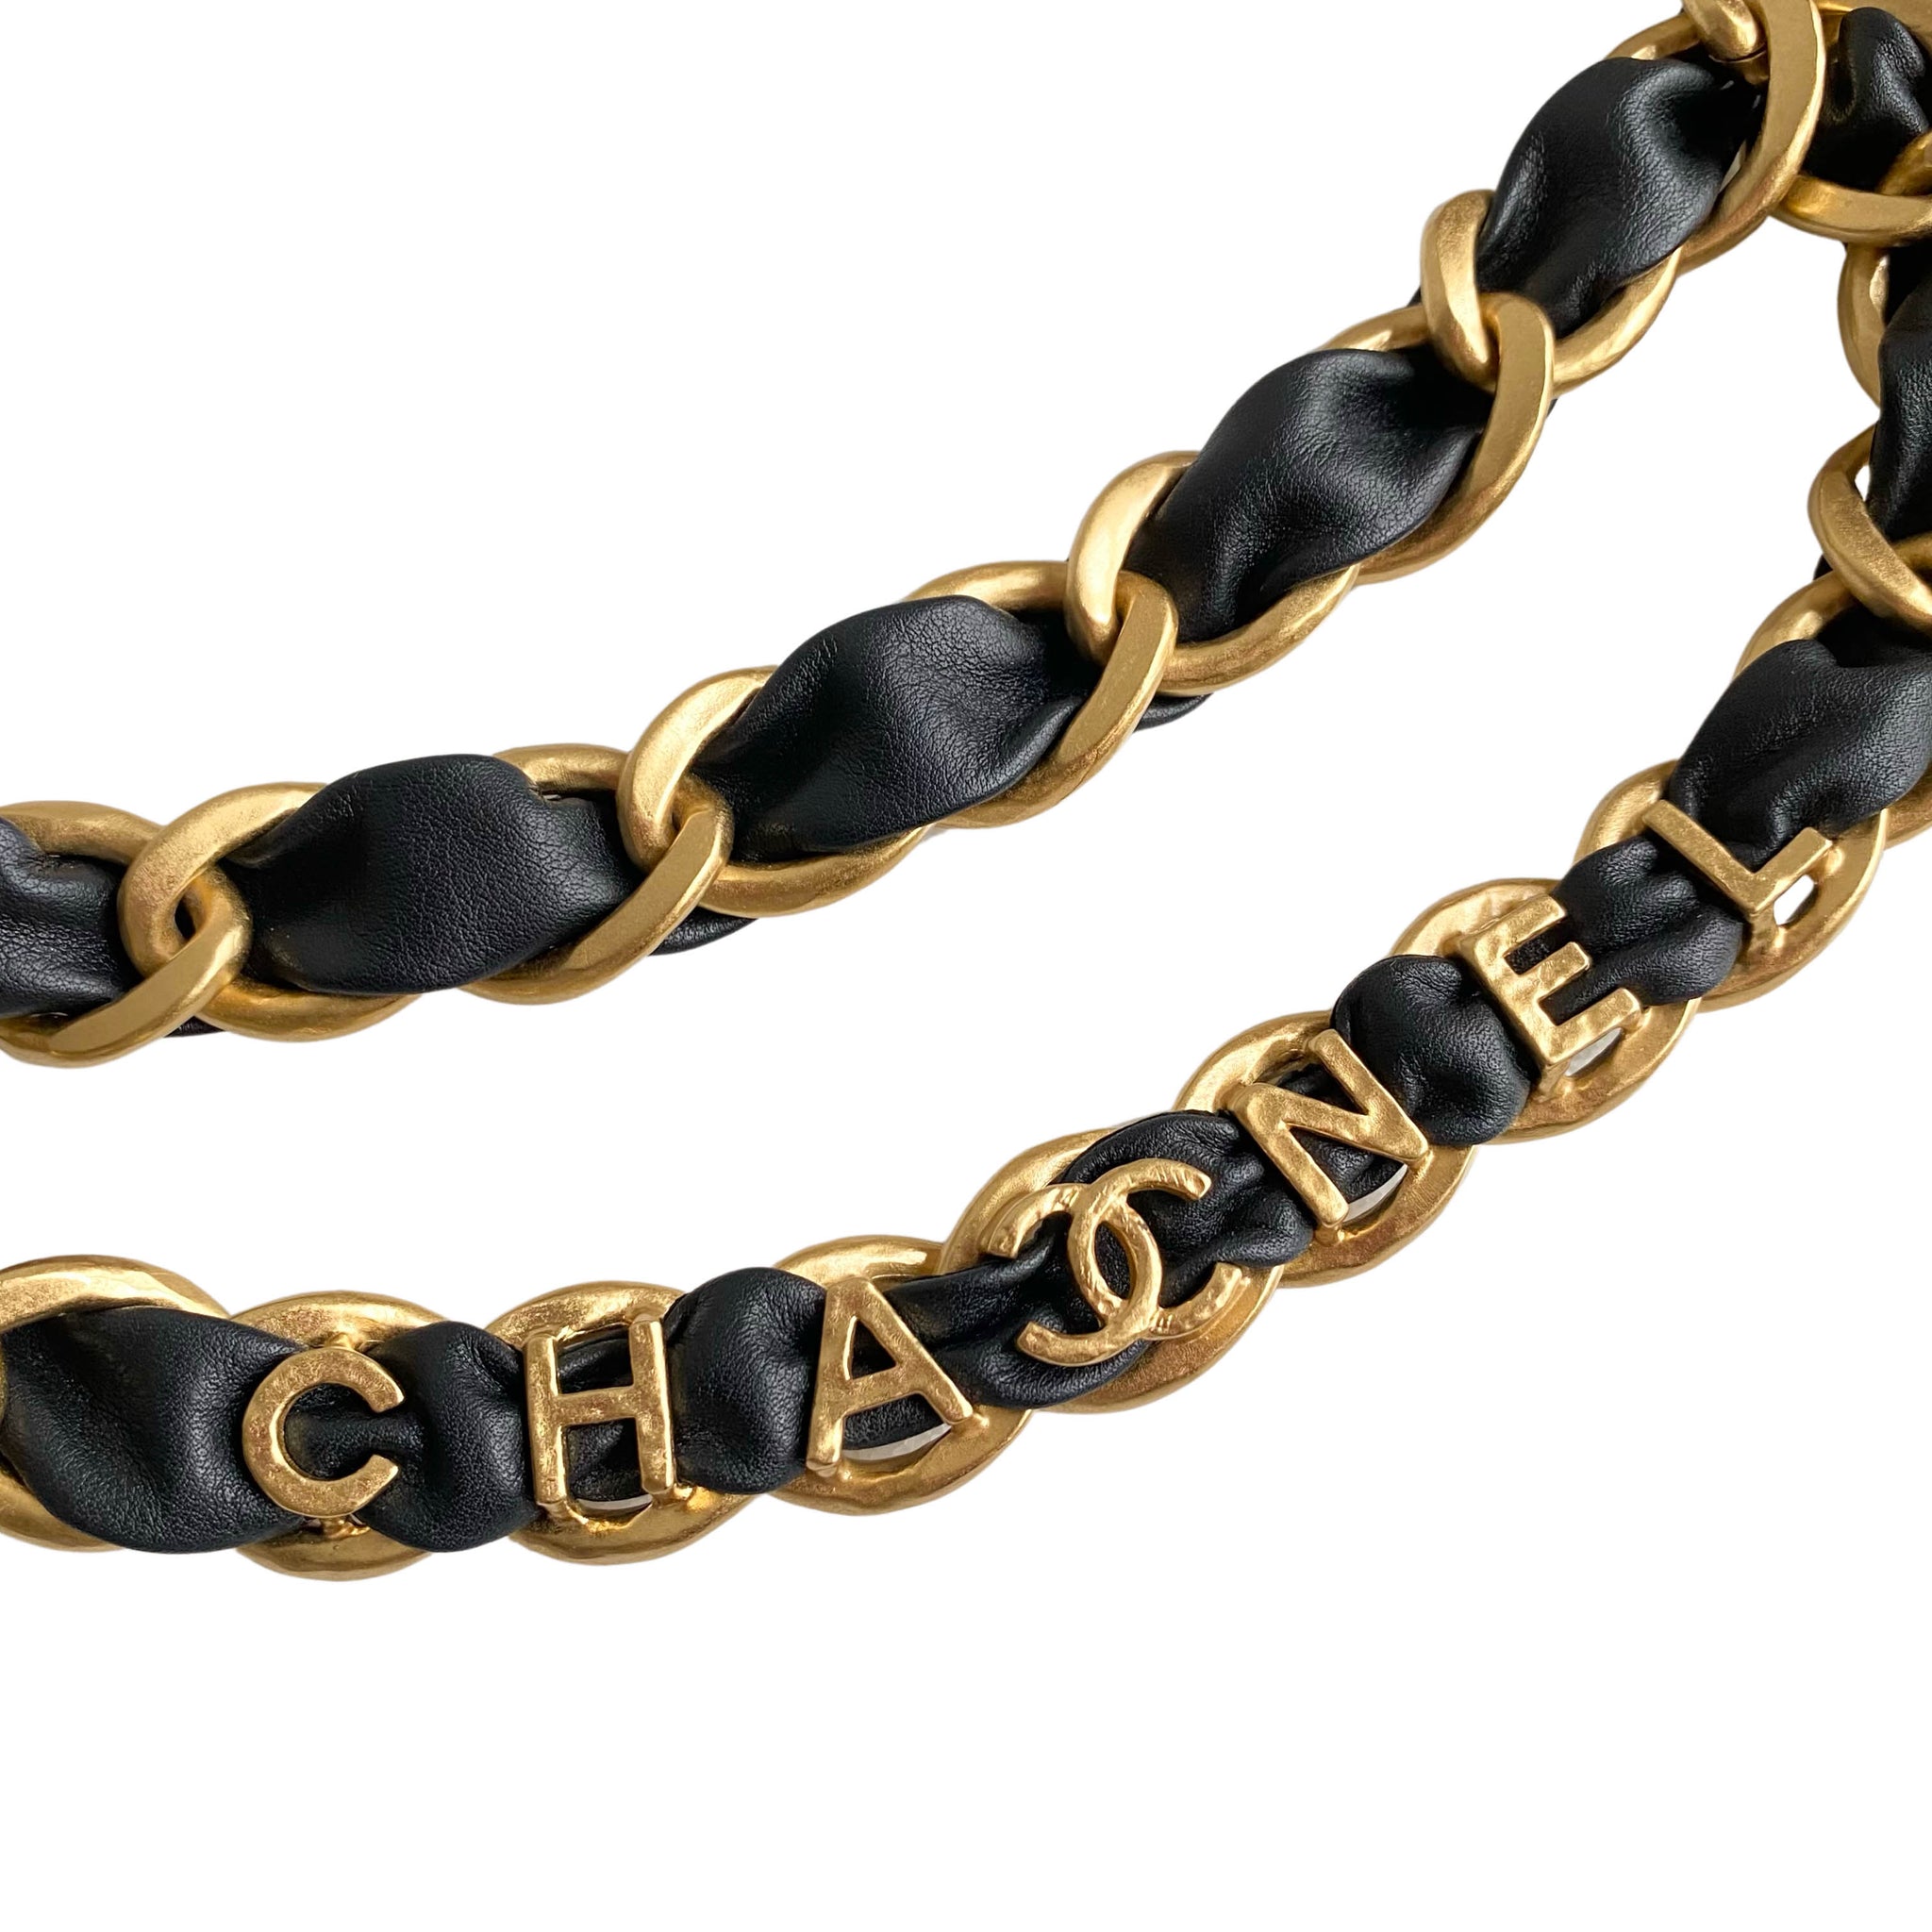 CHANEL Crystal City of Lights Letter Gold Tone Waist Chain Belt   TheReluxcom